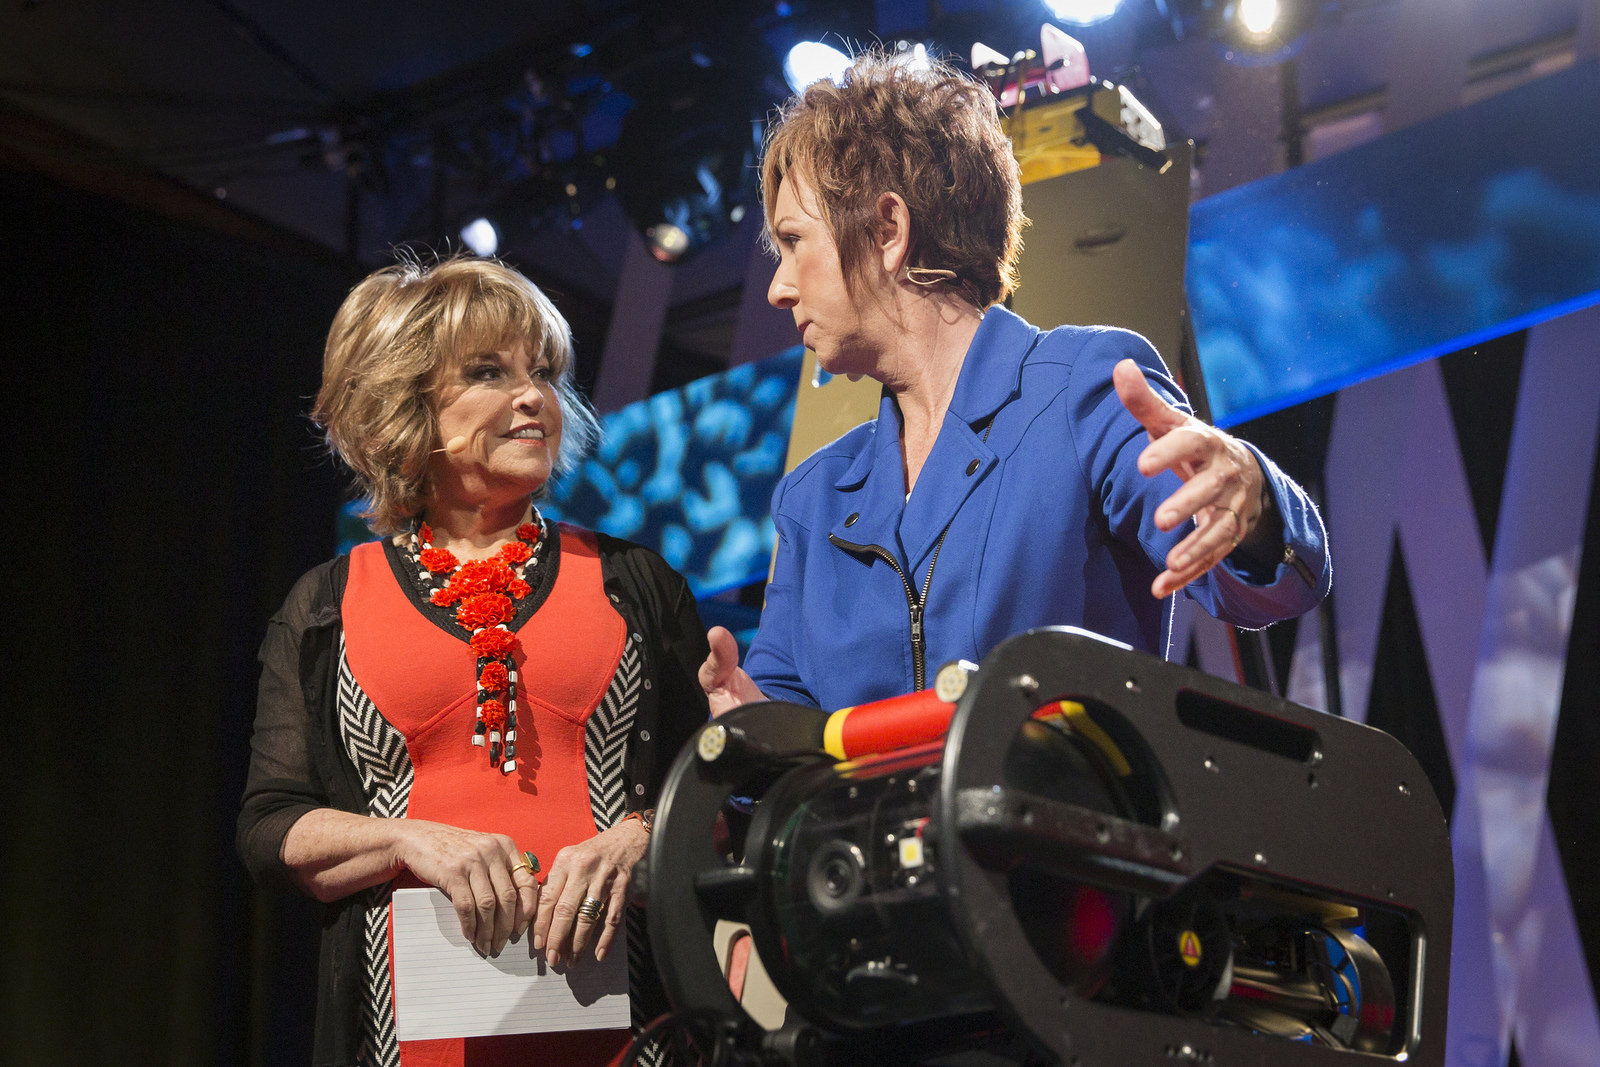 Robin Murphy shows host Pat Mitchell a disaster, able to go into disaster zones and send data back. She had a "petting zoo" of these robots onstage with her in Session 1. Photo: Marla Aufmuth